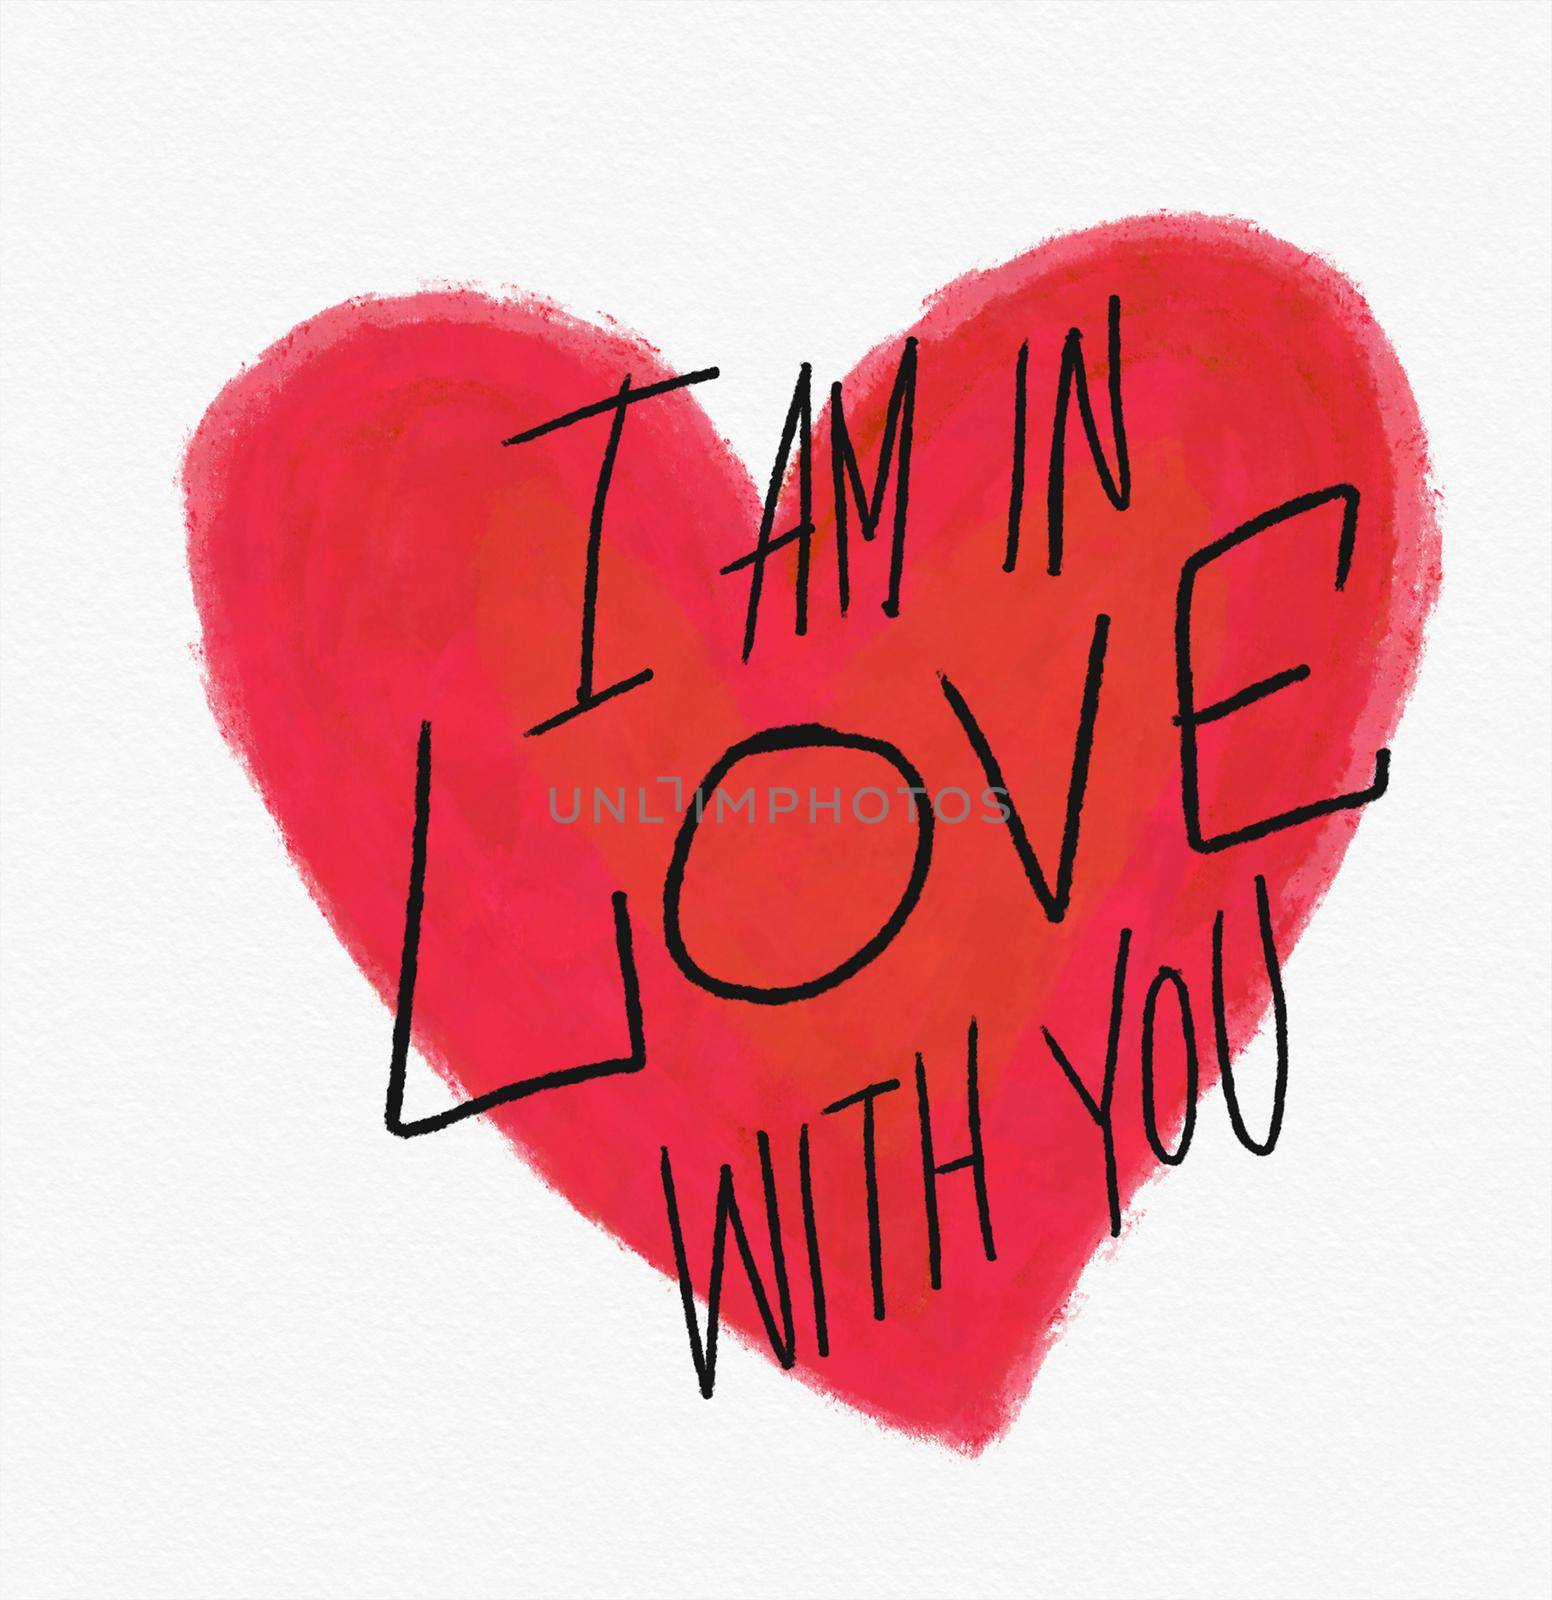 I am in love with you word and red heart watercolor painting illustration by Yoopho